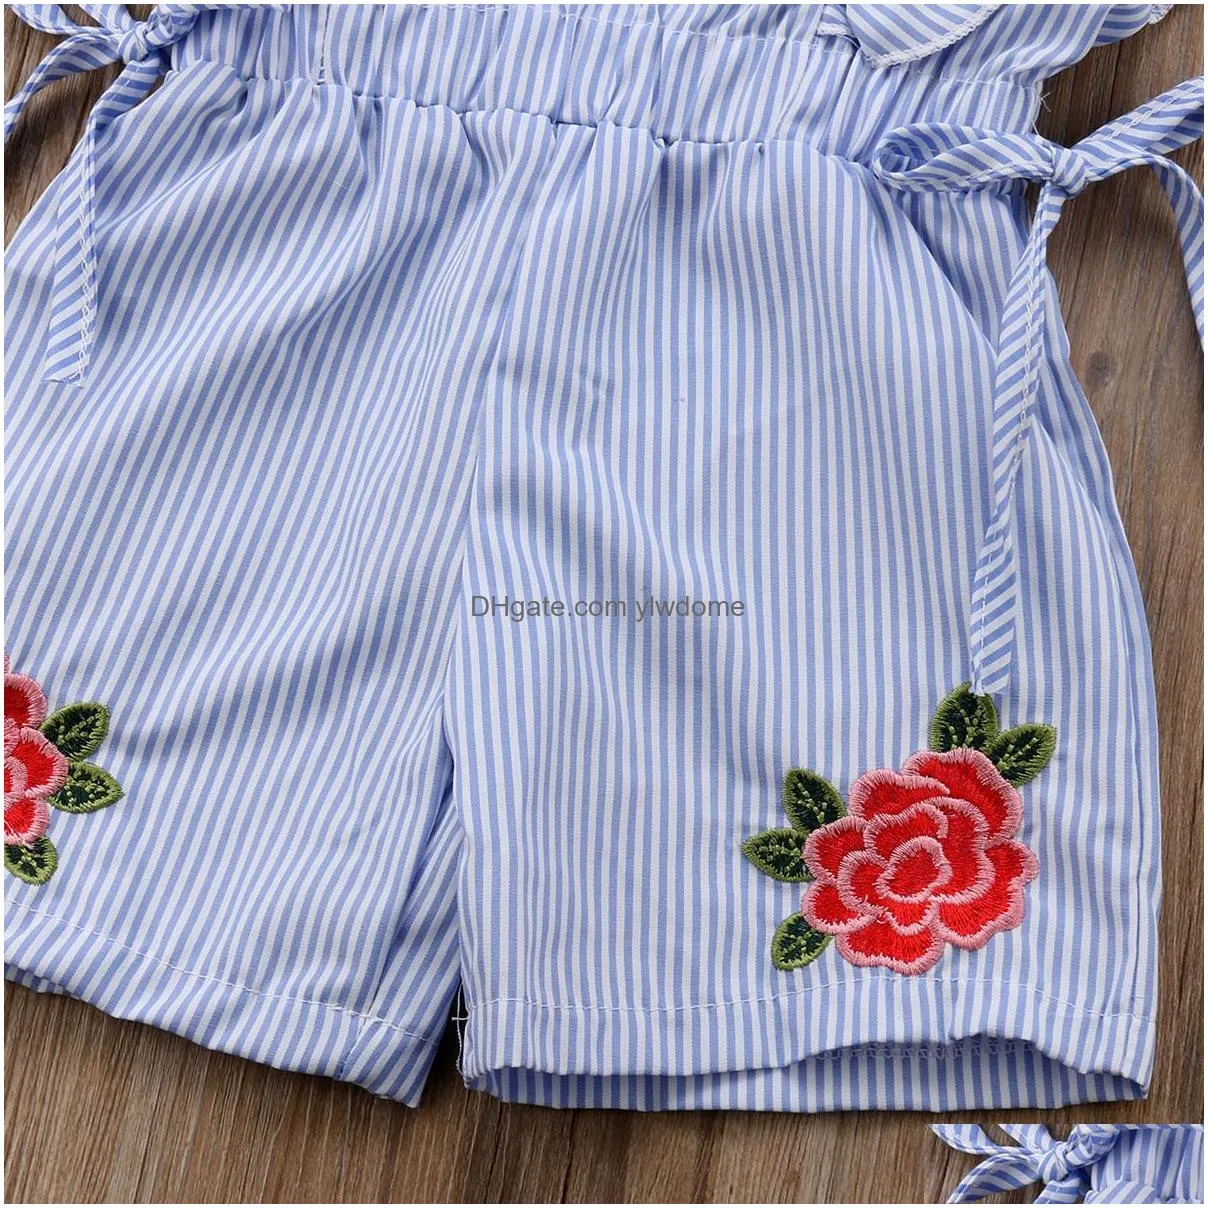 Rompers Toddler Kids Baby Girl Flower Stripe Ruffle Romper Jumpsuit Outfits Clothes 230525 Drop Delivery Dhe7B